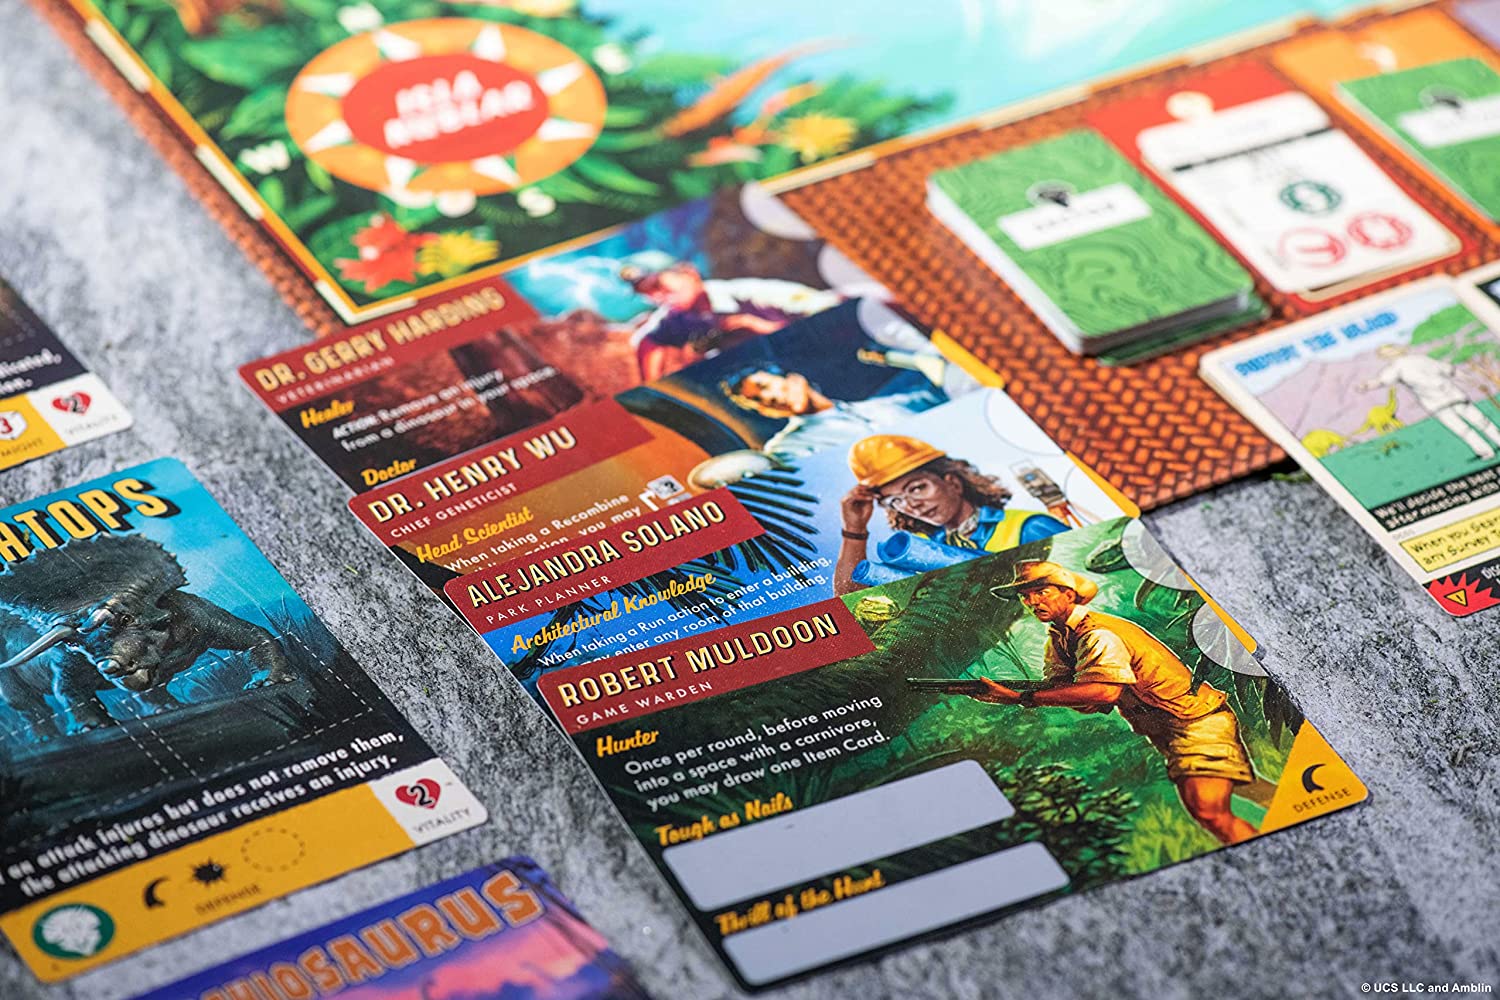 The Legacy of Isla Nublar player cards